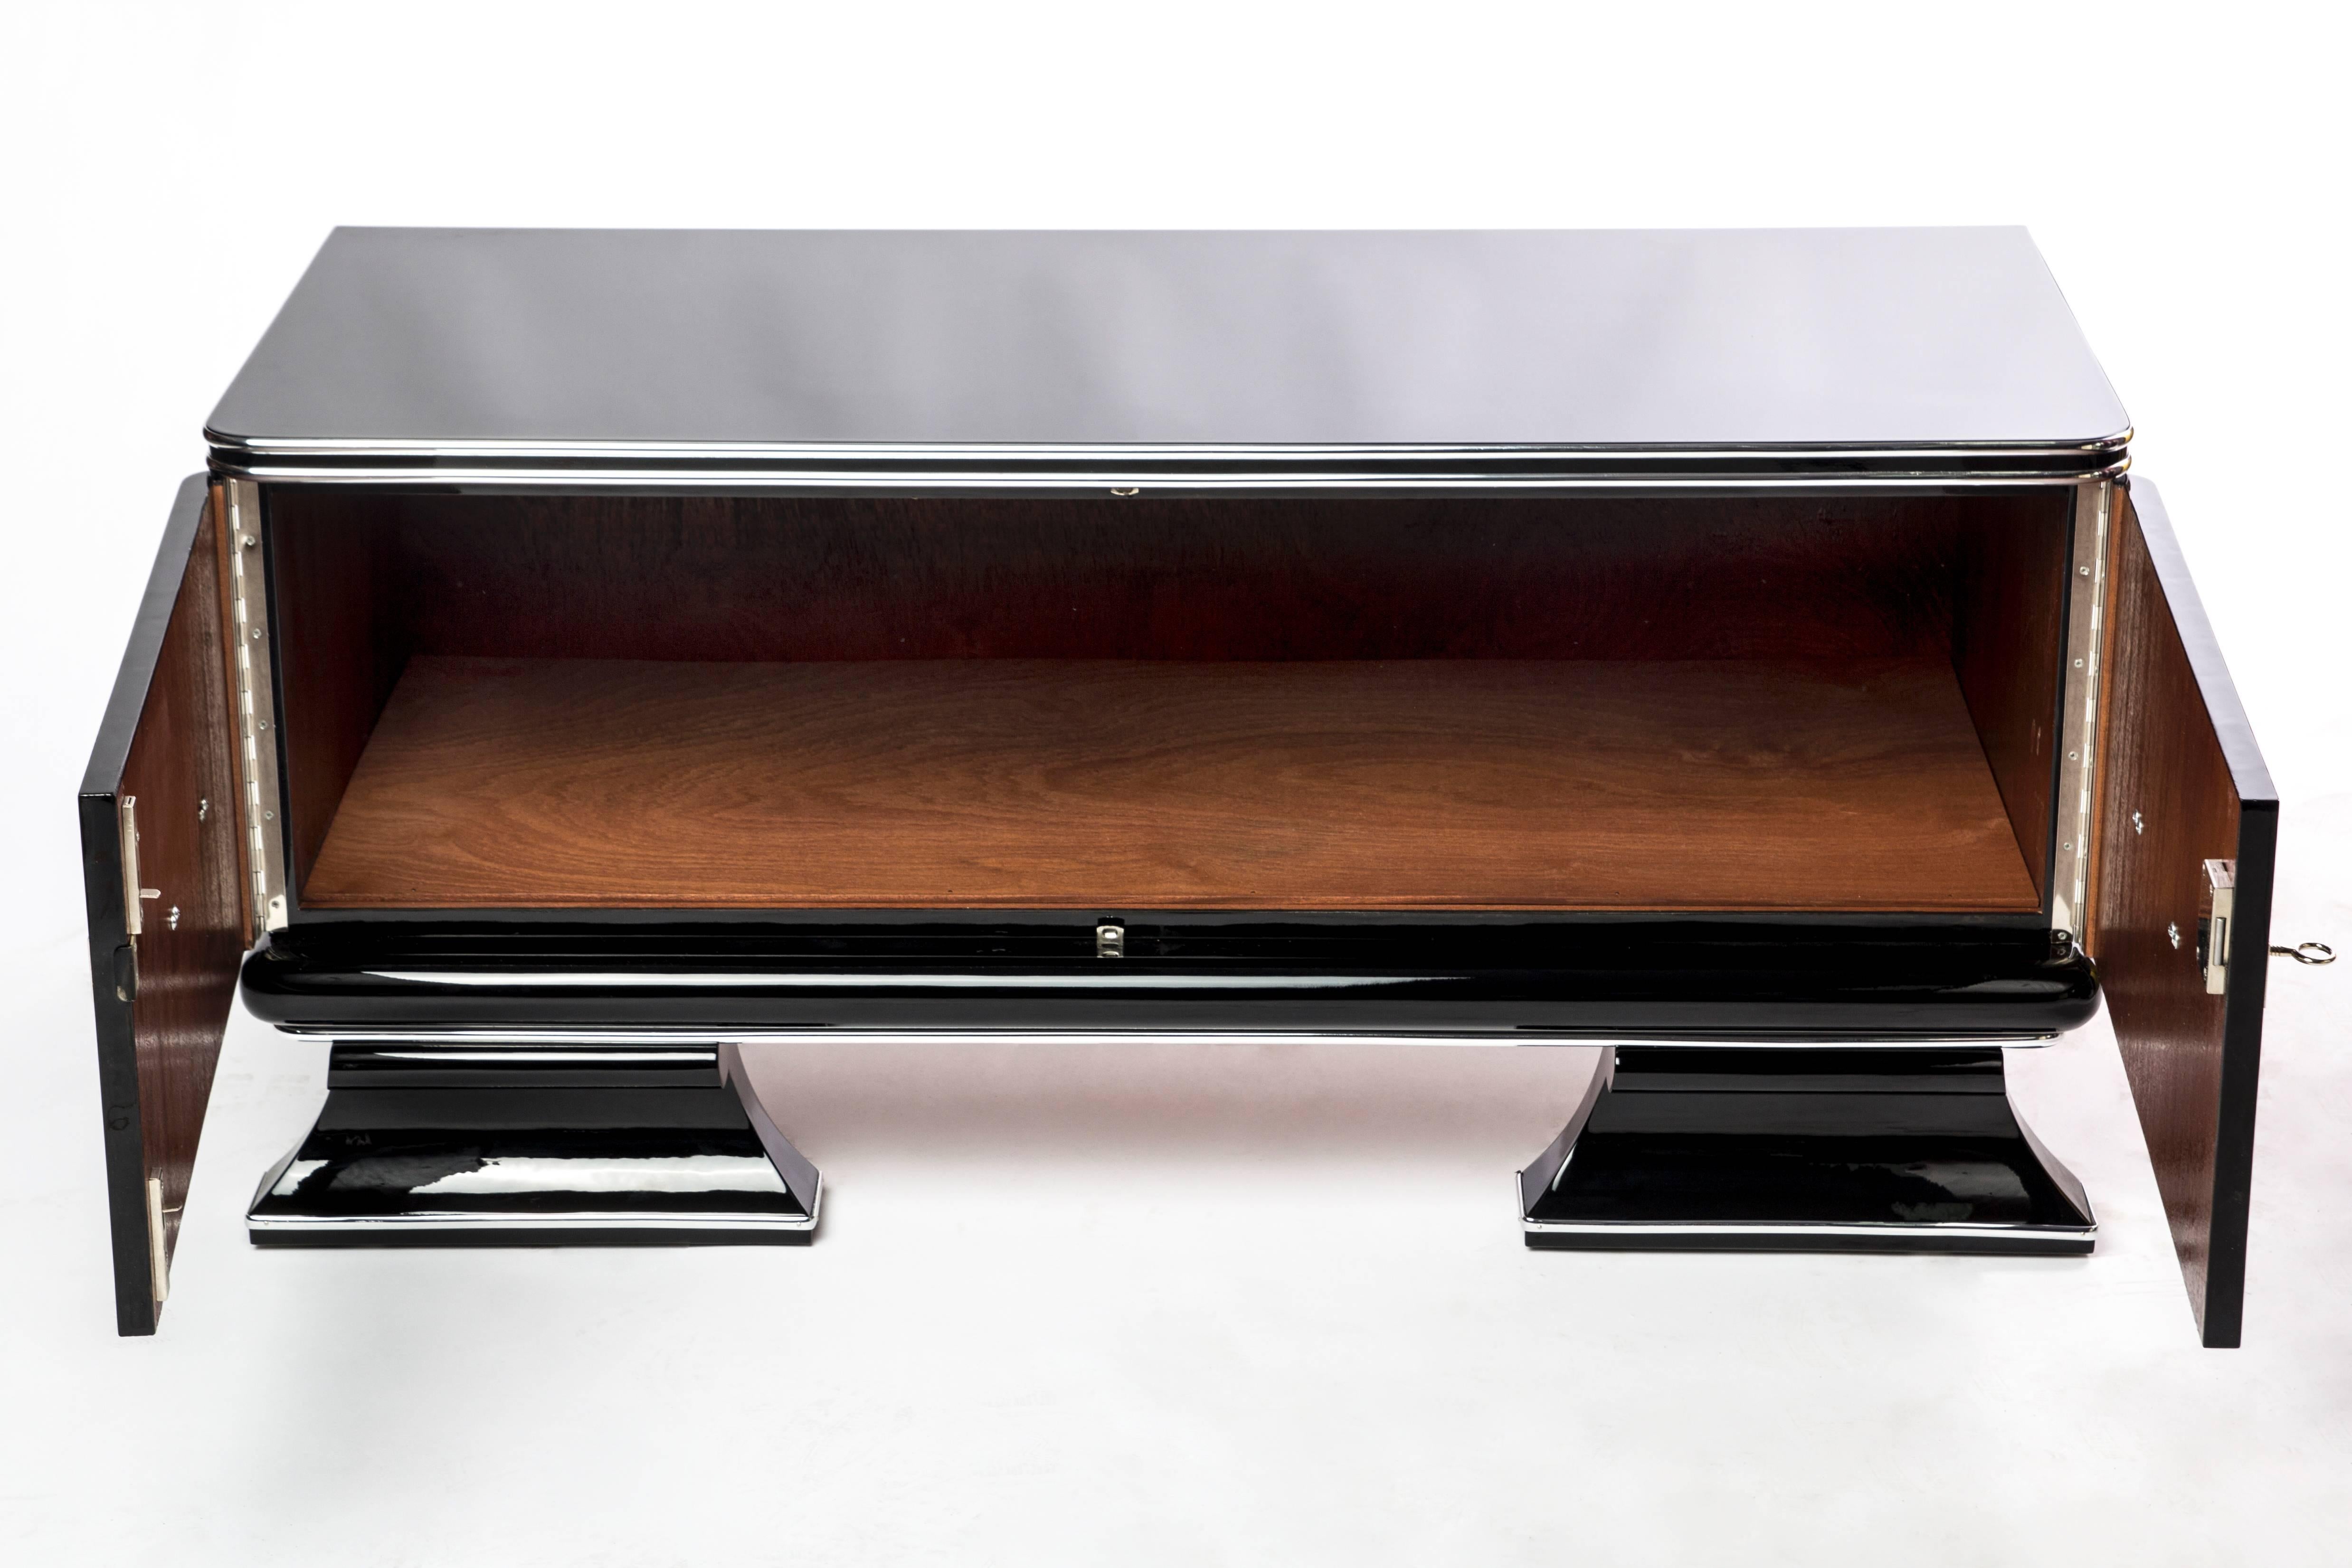 This superb Art Deco bar features a French foot base with chrome lines and fixtures finished in a high gloss black lacquer.